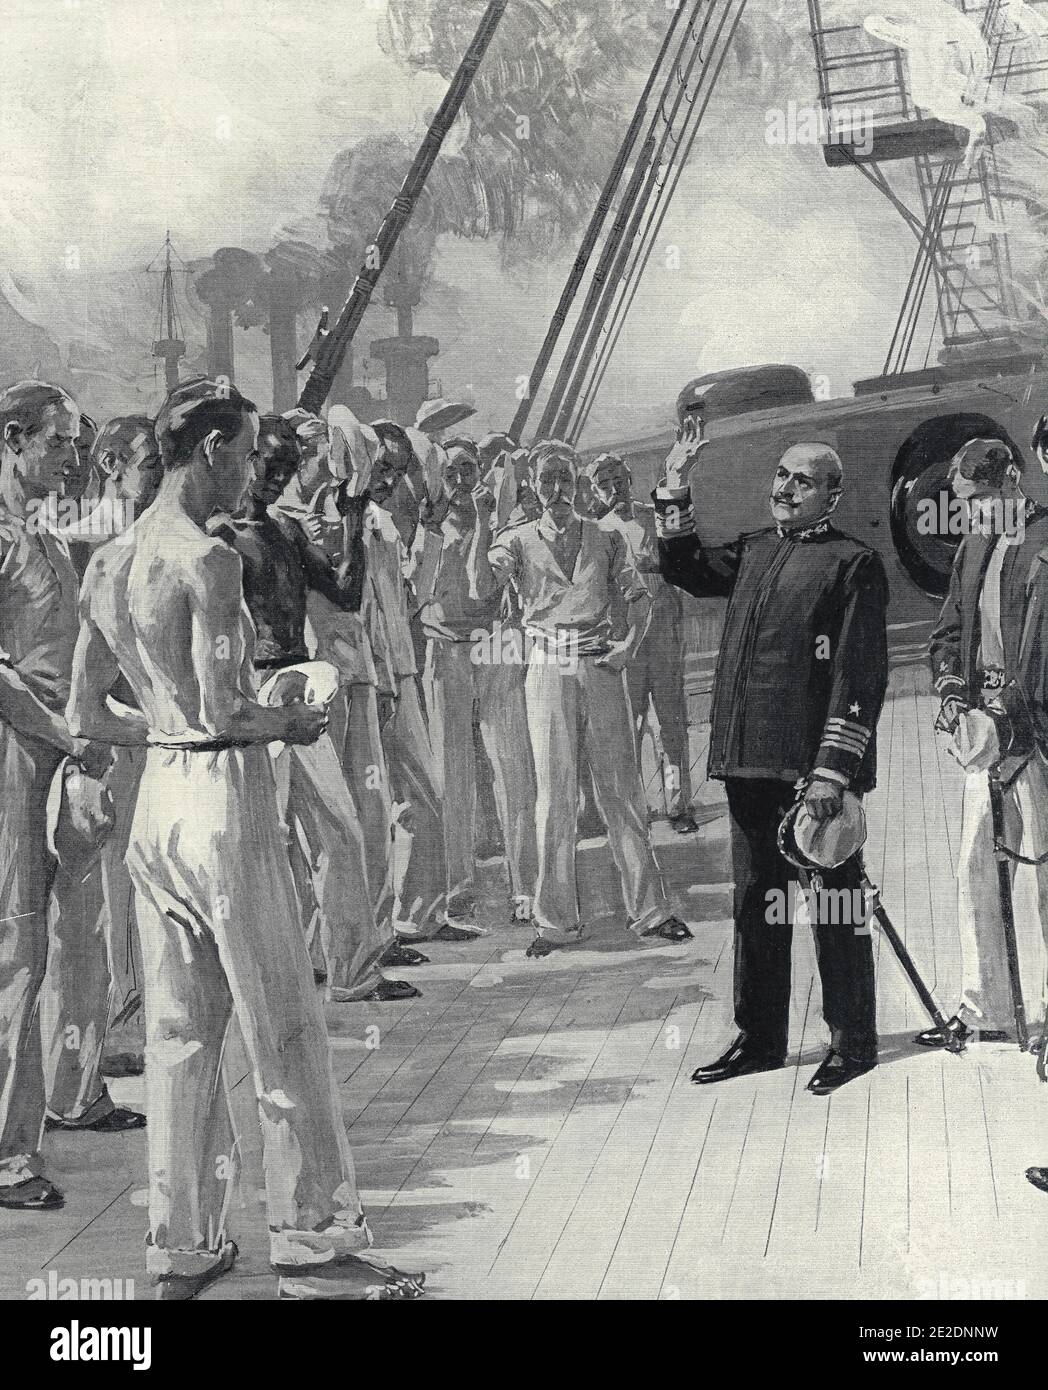 Captain Philip Giving Thanks on the deck of the USS Texas during the Spanish American War, 1898 Stock Photo